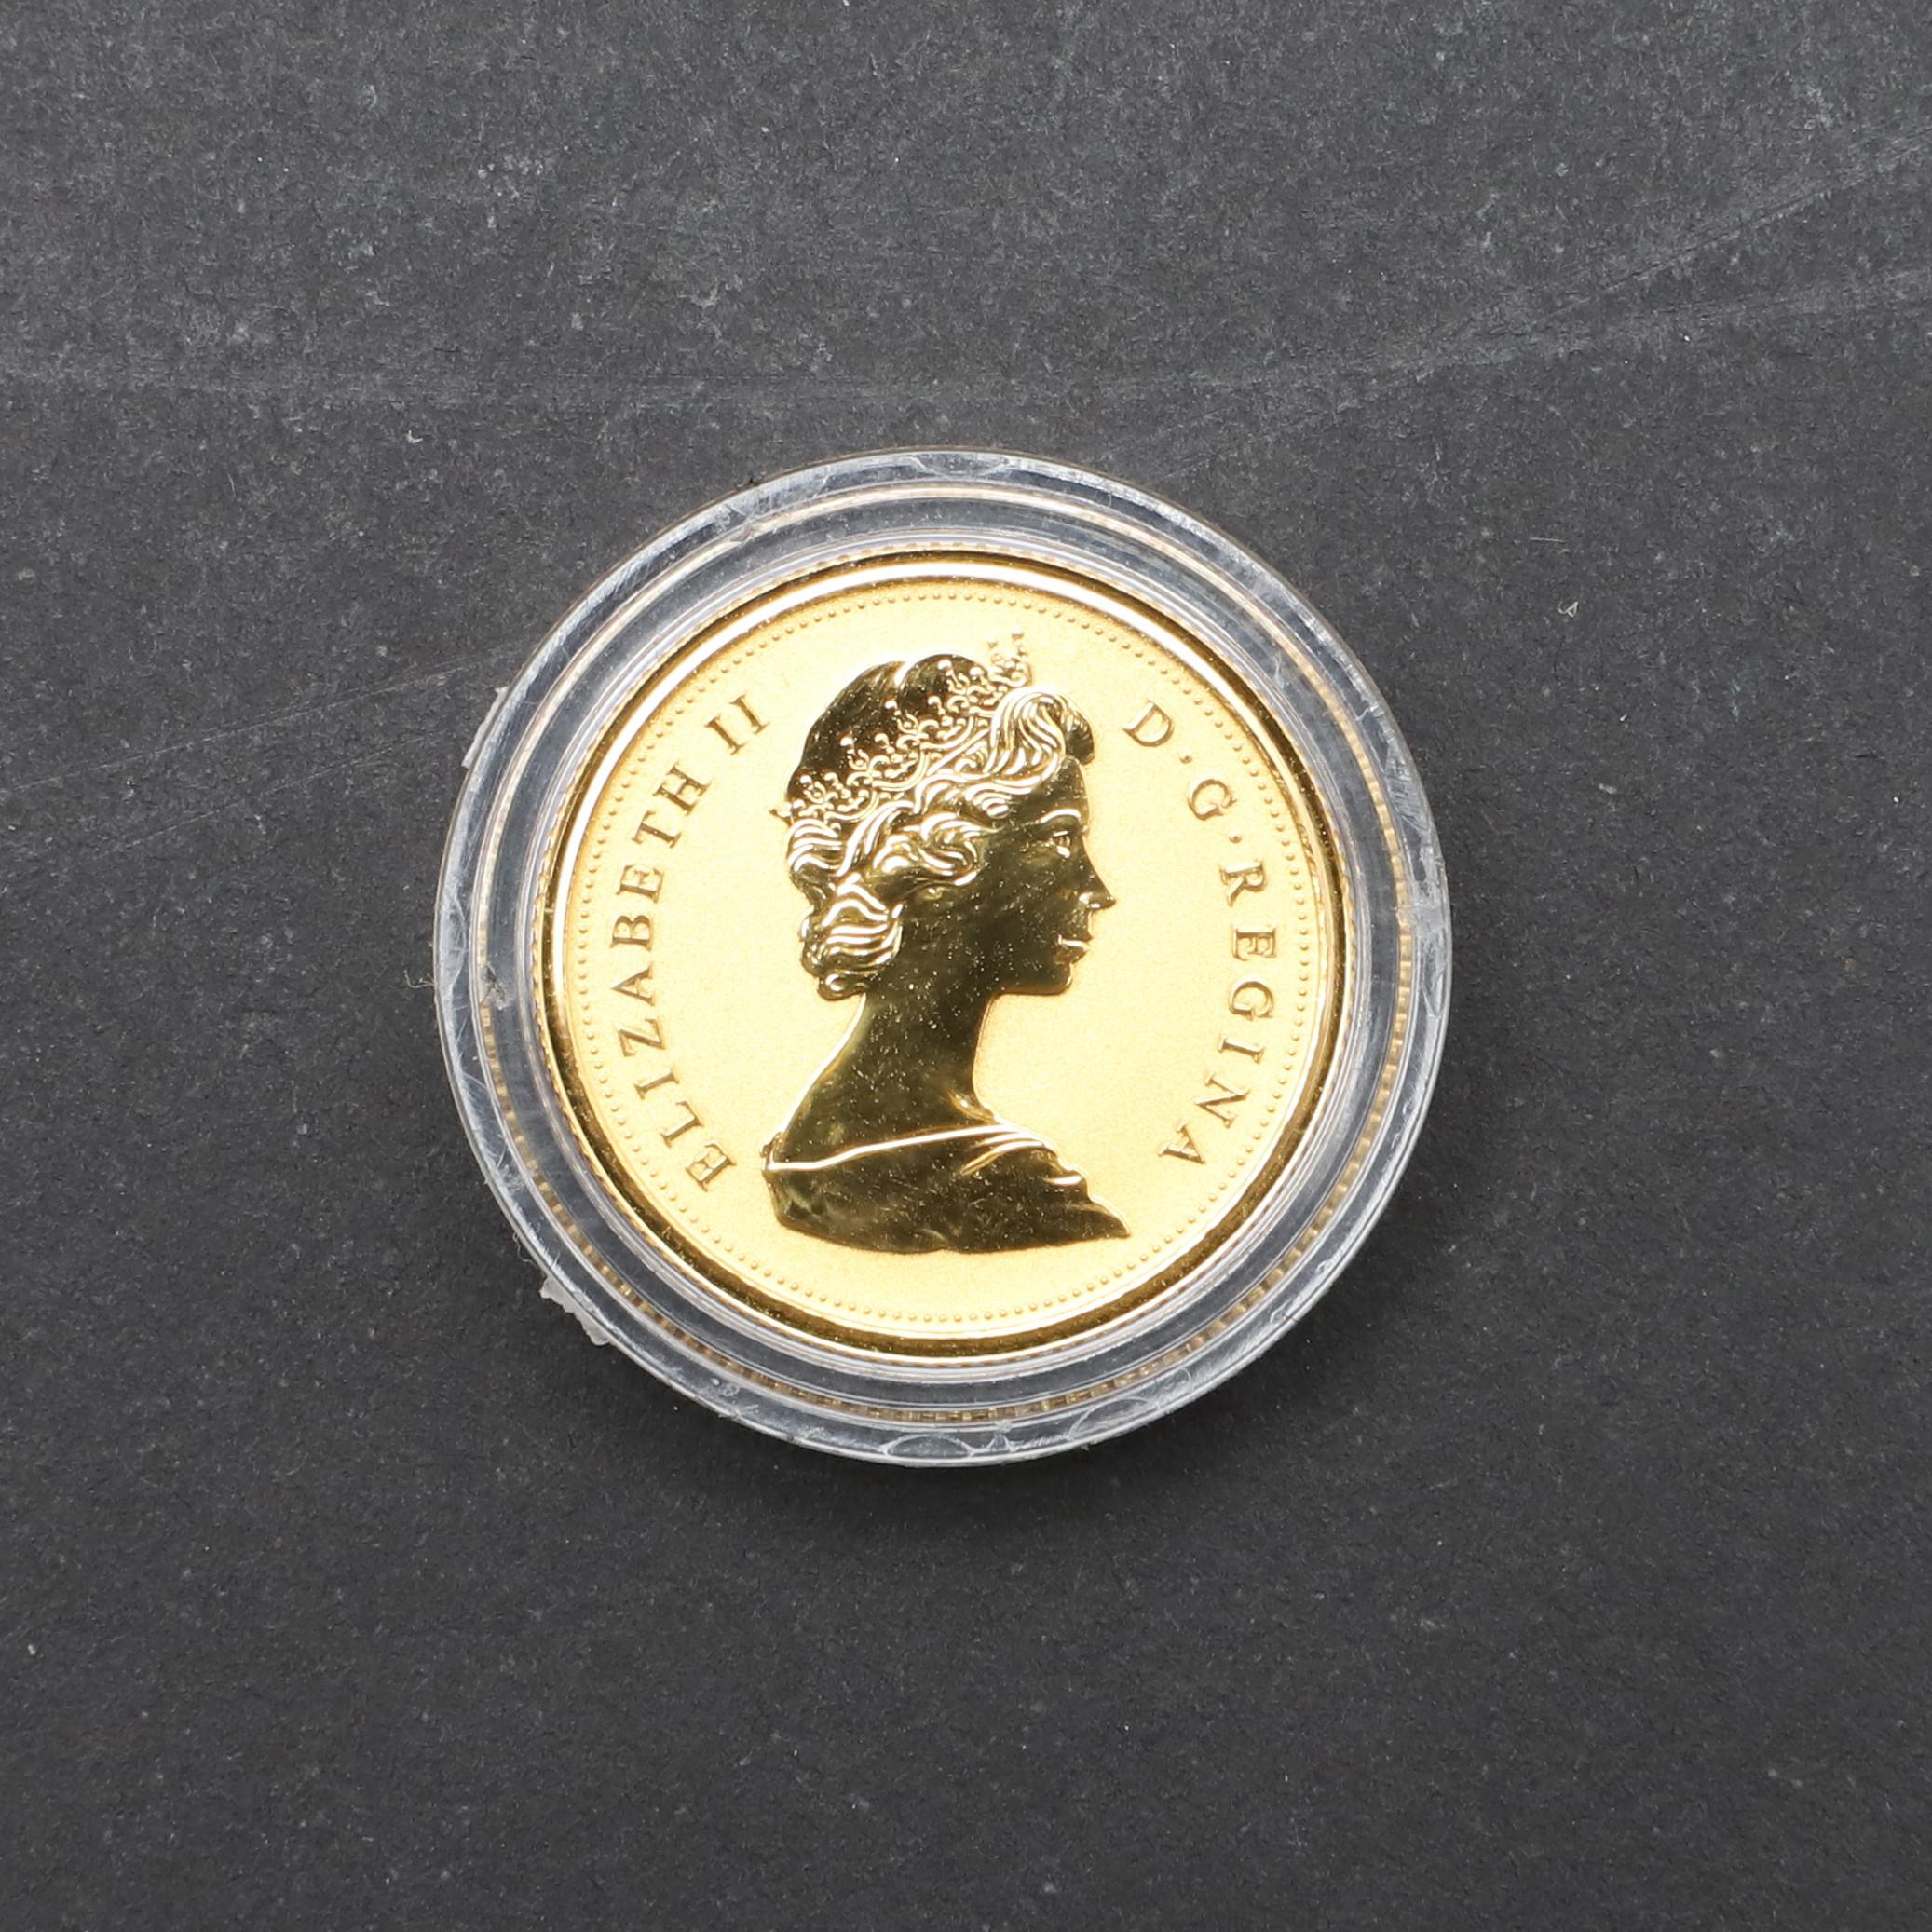 AN ELIZABETH II ROYAL CANADIAN MINT PROOF GOLD MAPLE. 2015. - Image 2 of 5